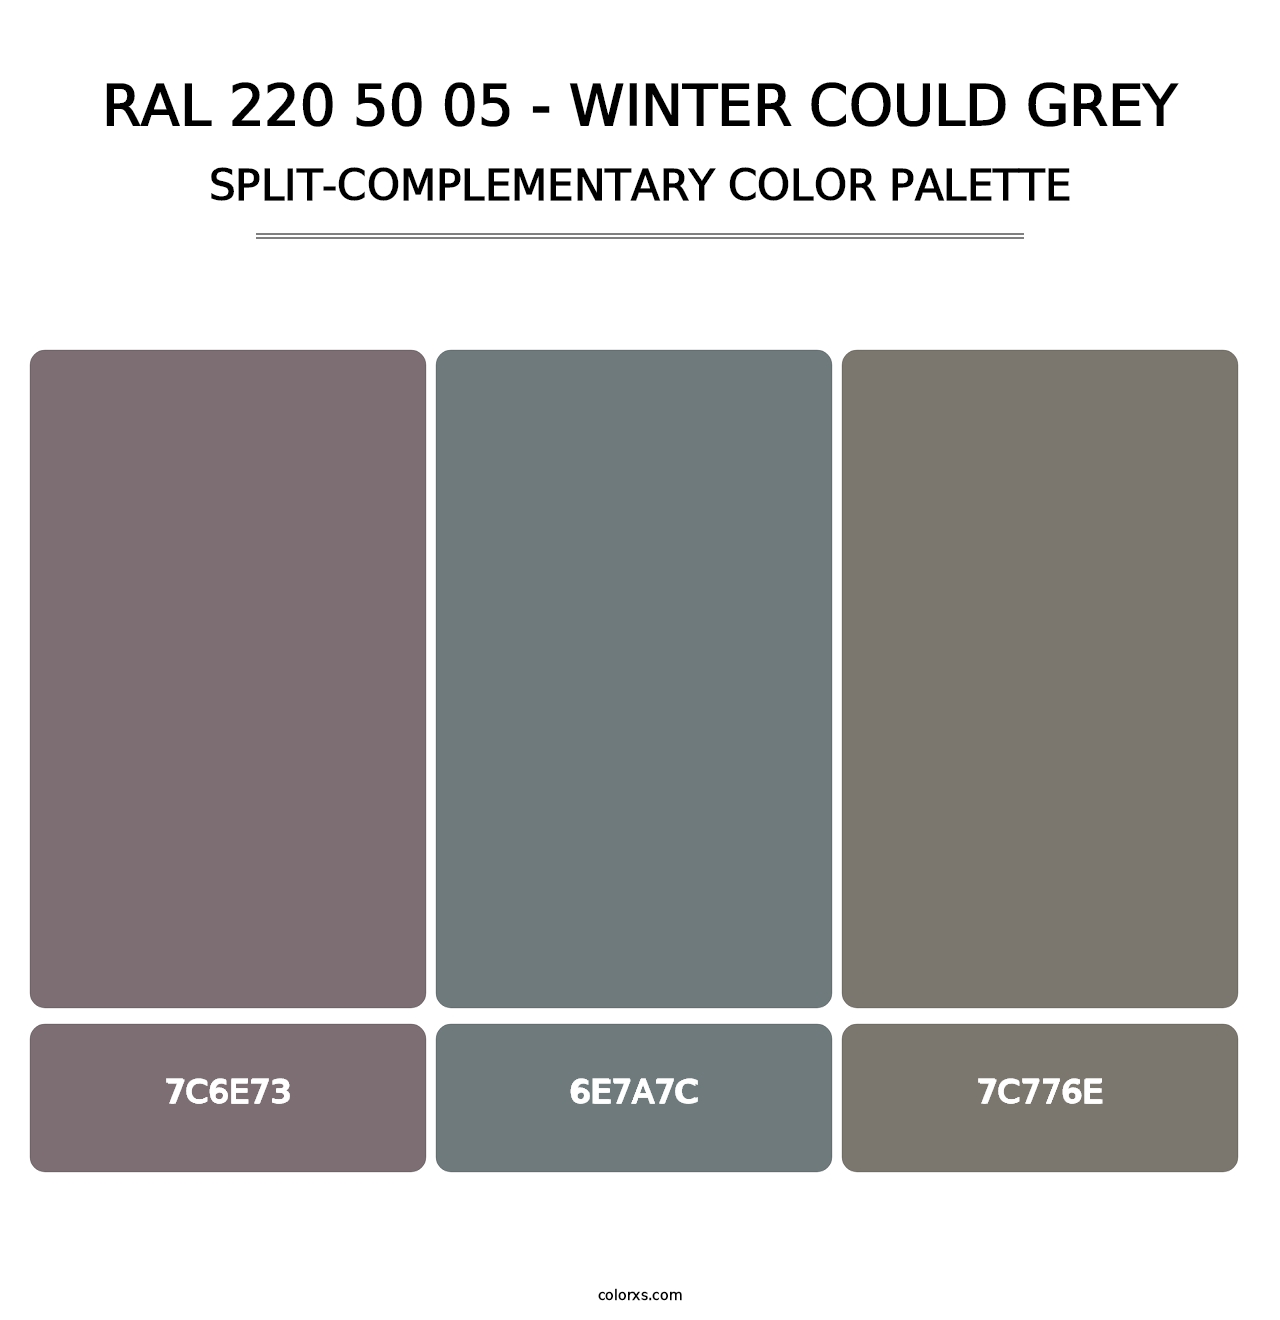 RAL 220 50 05 - Winter Could Grey - Split-Complementary Color Palette